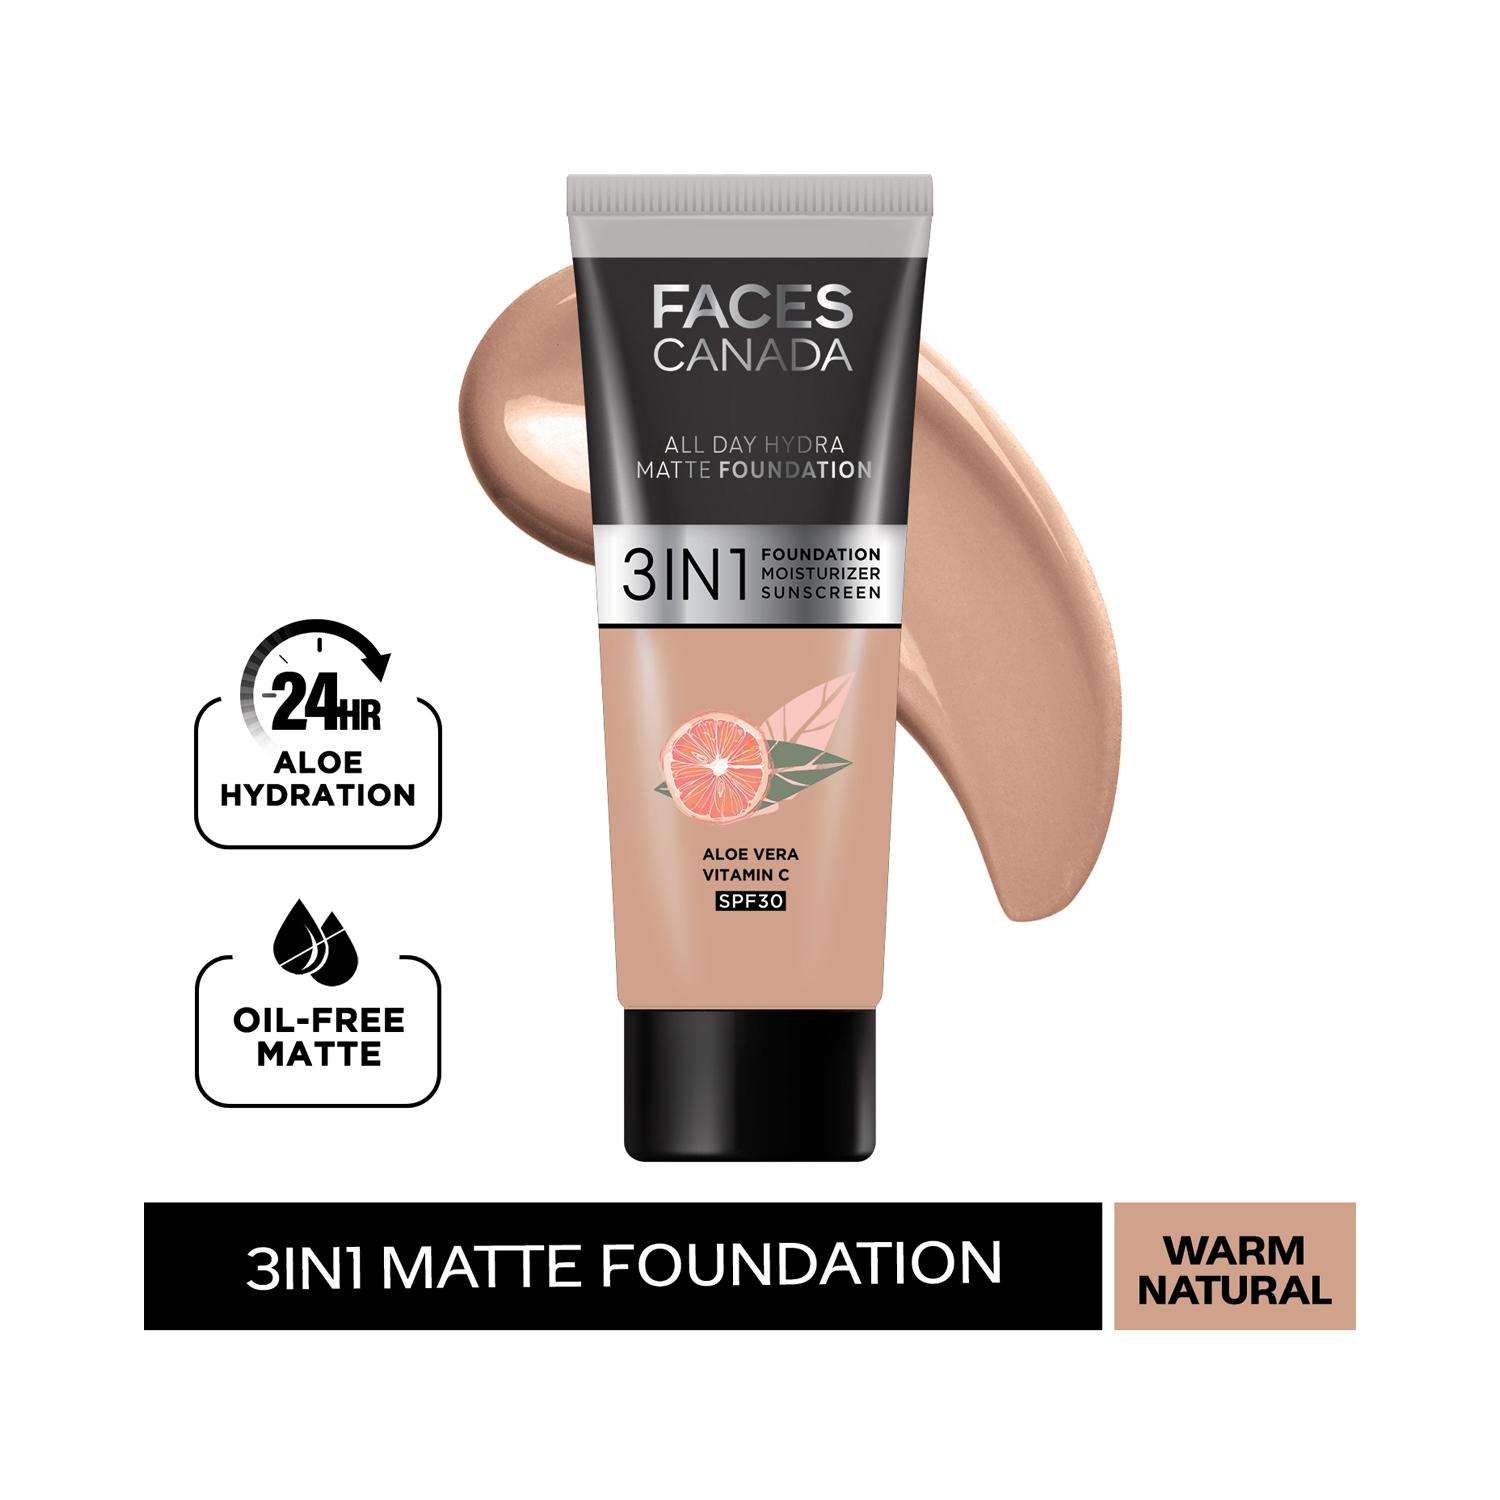 faces canada 3-in-1 all day hydra matte foundation - 021 warm natural (15ml)